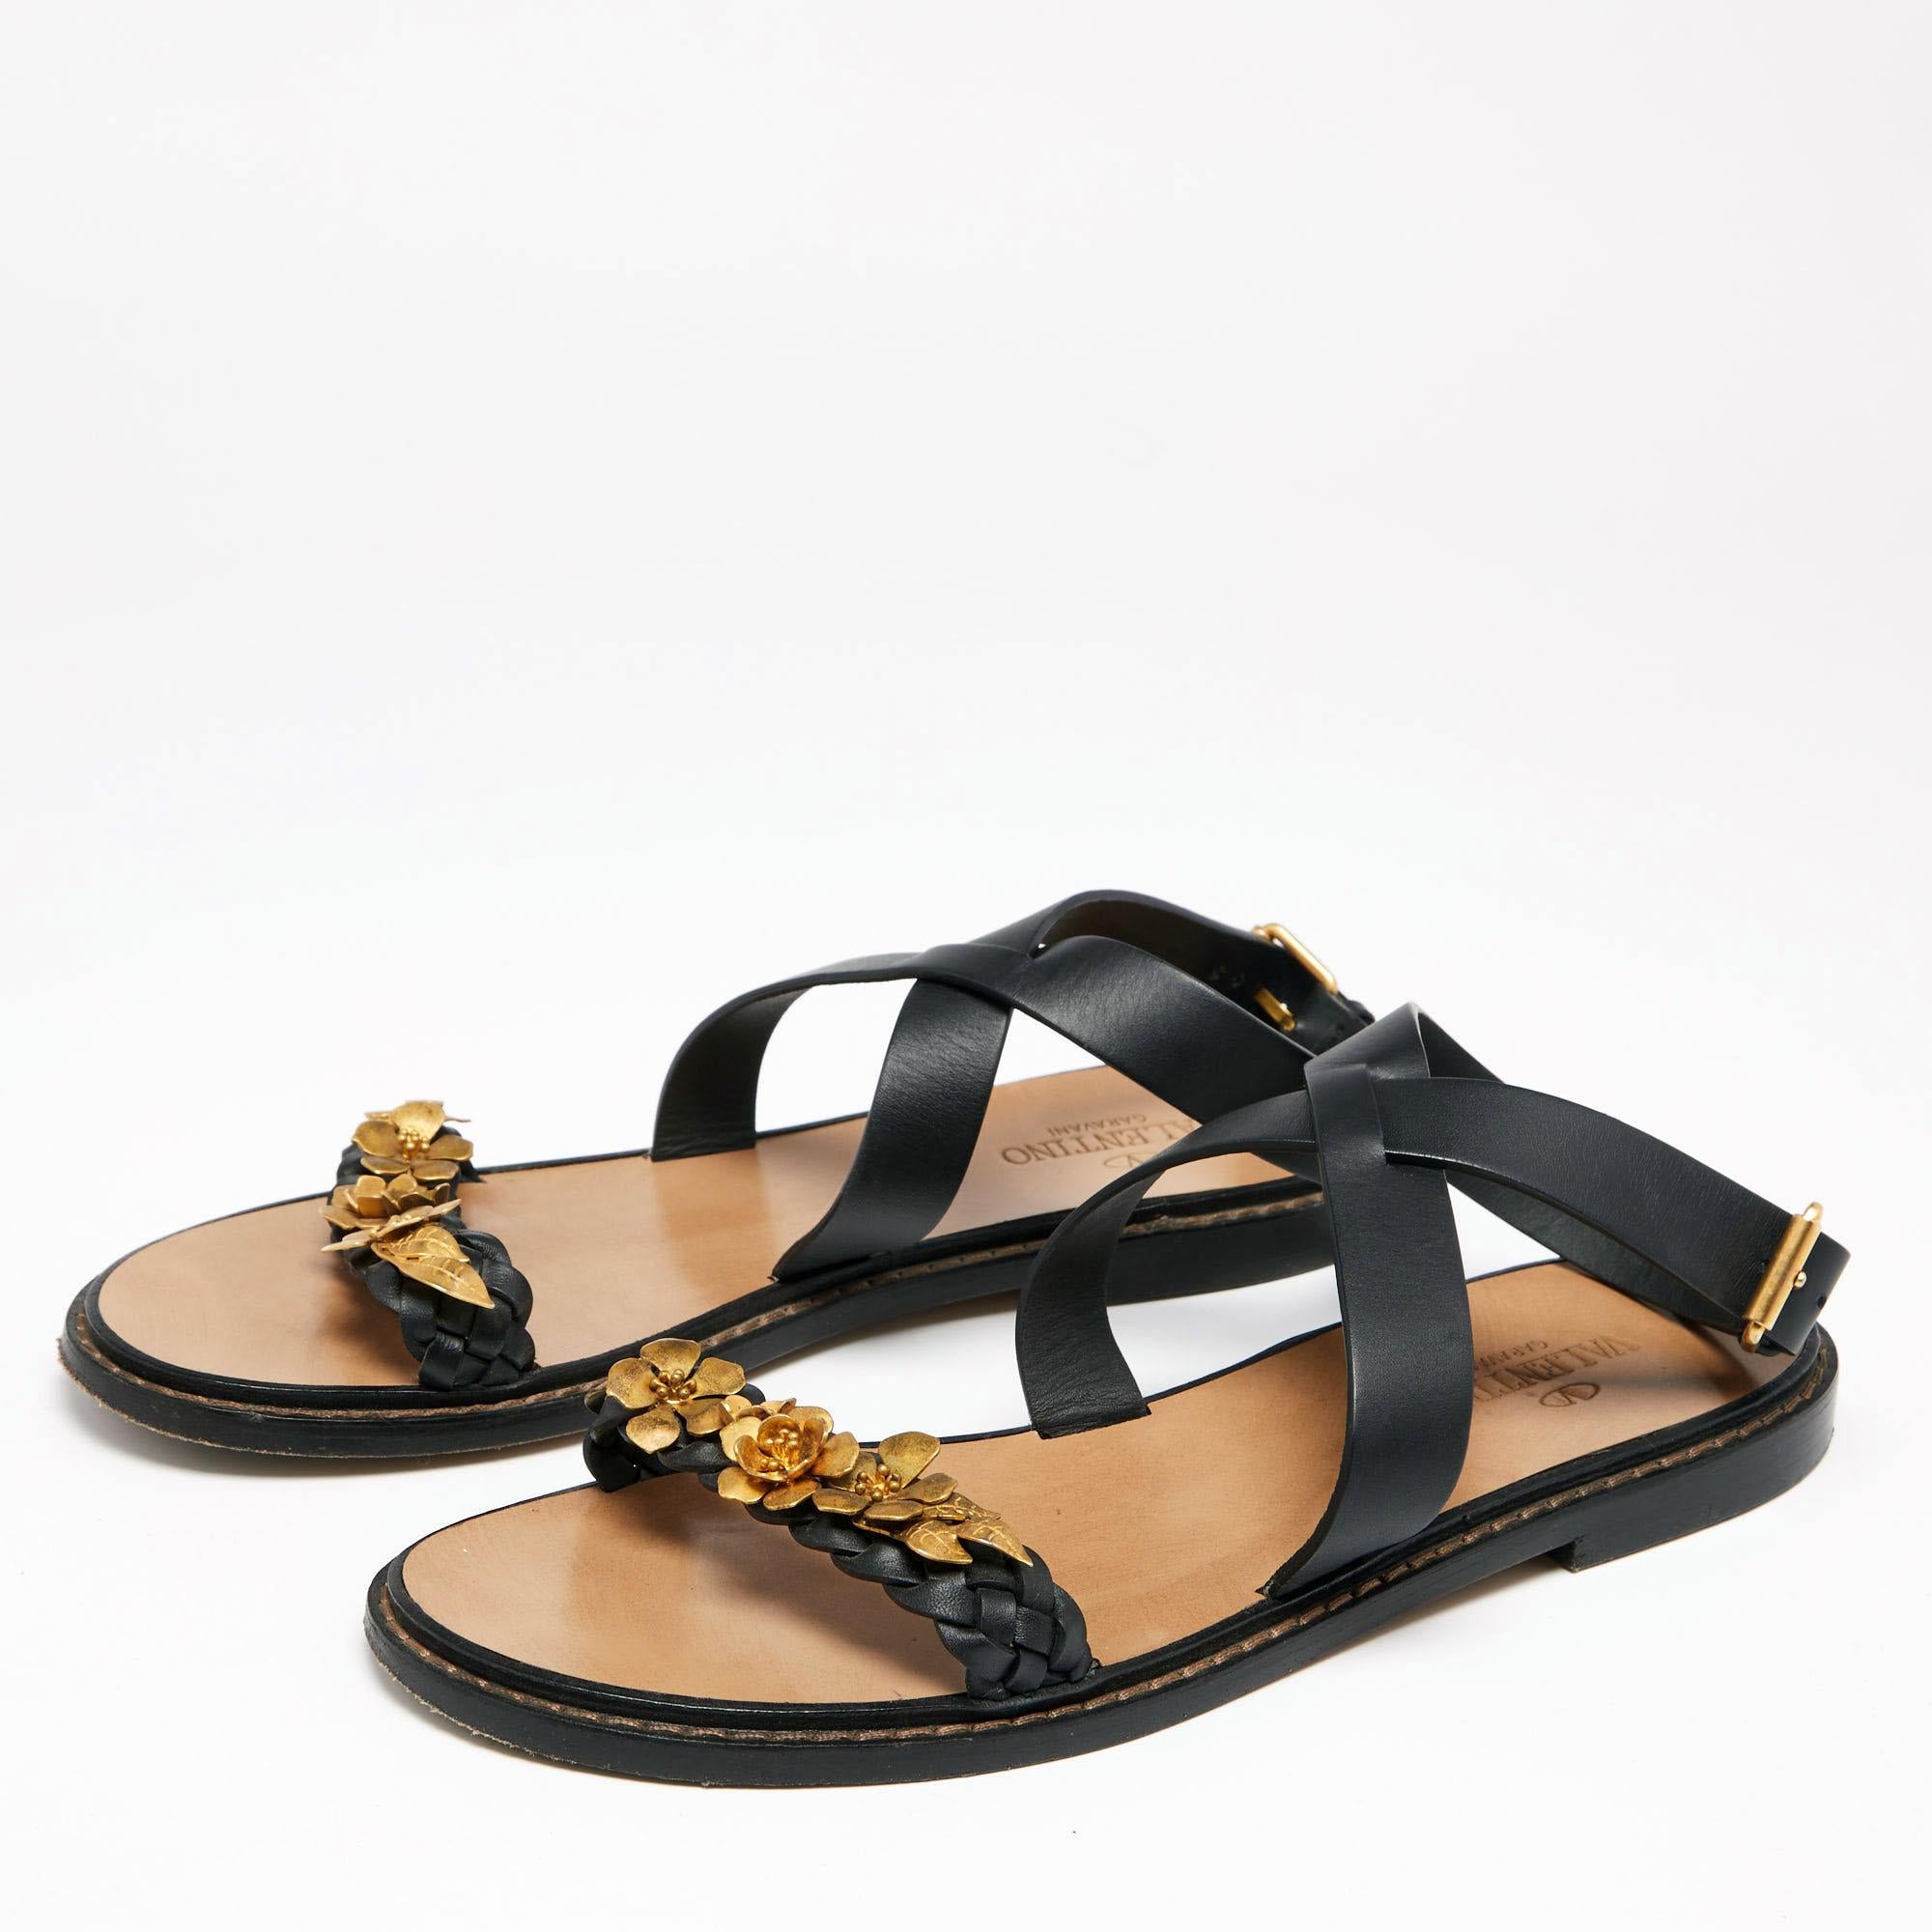 Sandals are a must-have for any season, but especially for the summer. This pair by Valentino is perfect for long summer days and eventful nights. An ideal daily wear companion, these sandals will help you nail the stylish look.

